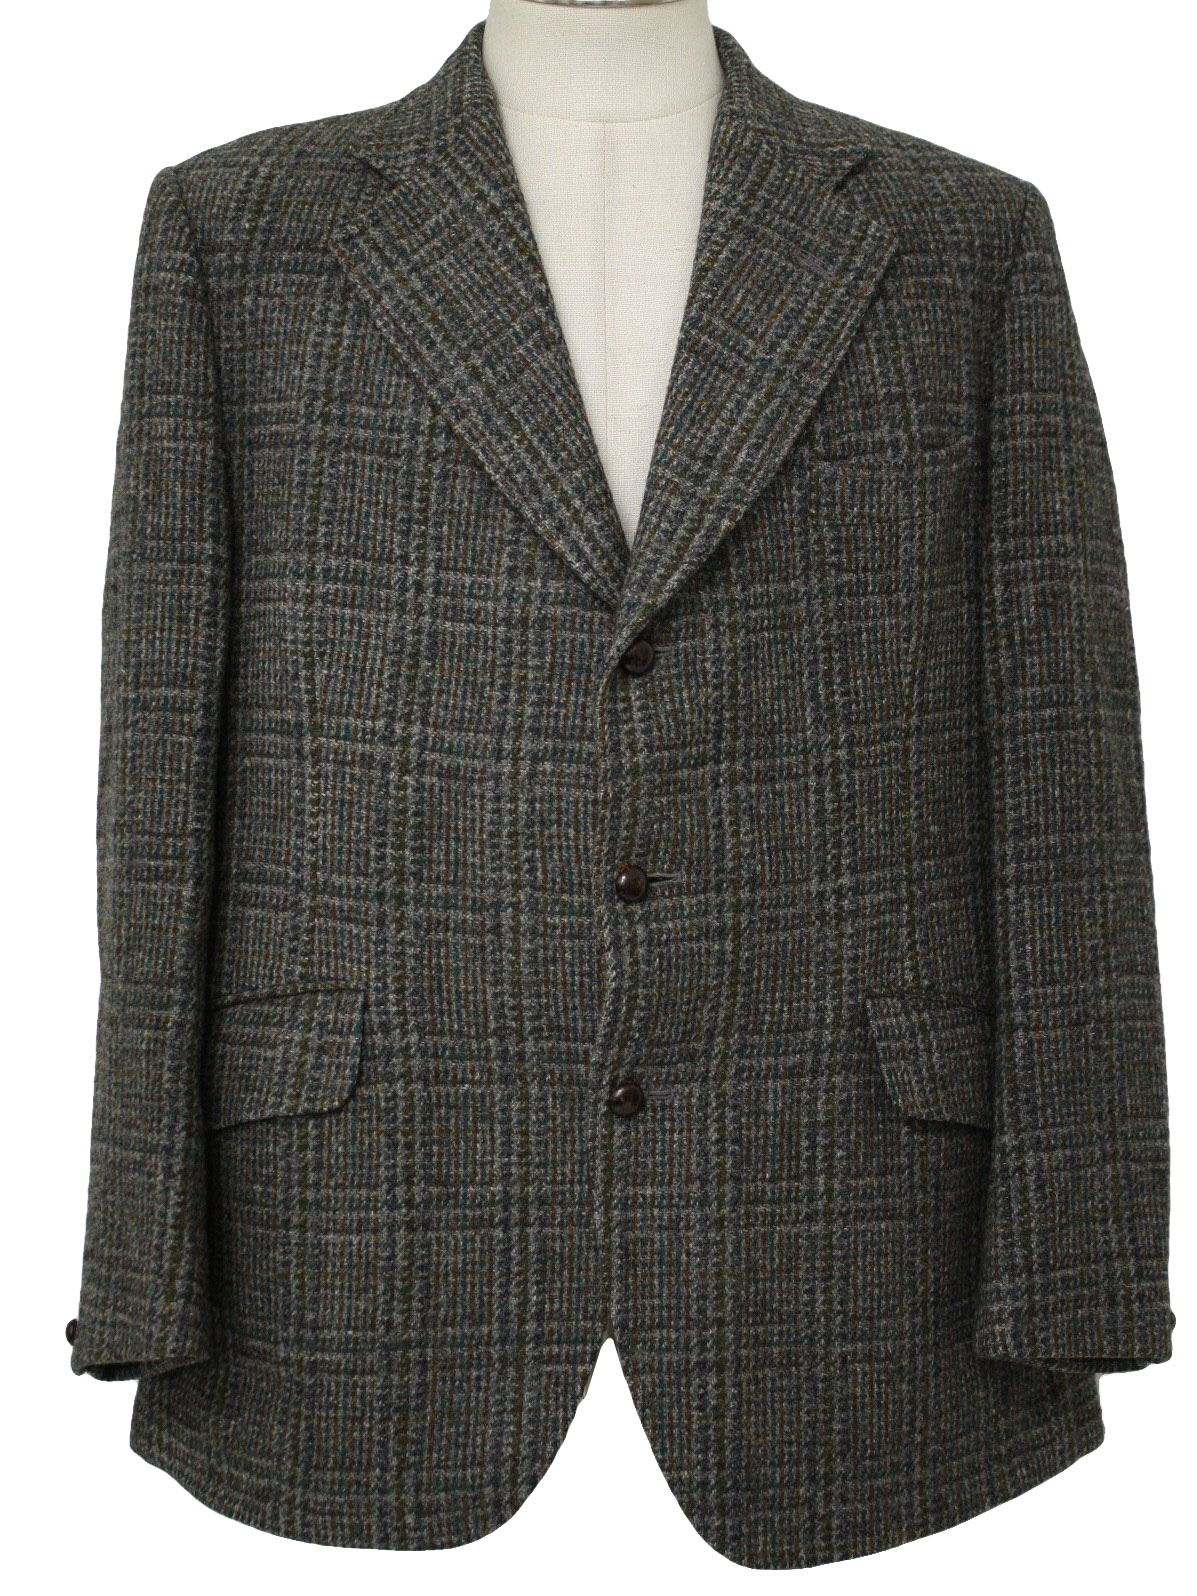 1970s Dunn and Co. by Harris Tweed Jacket: 70s -Dunn and Co. by